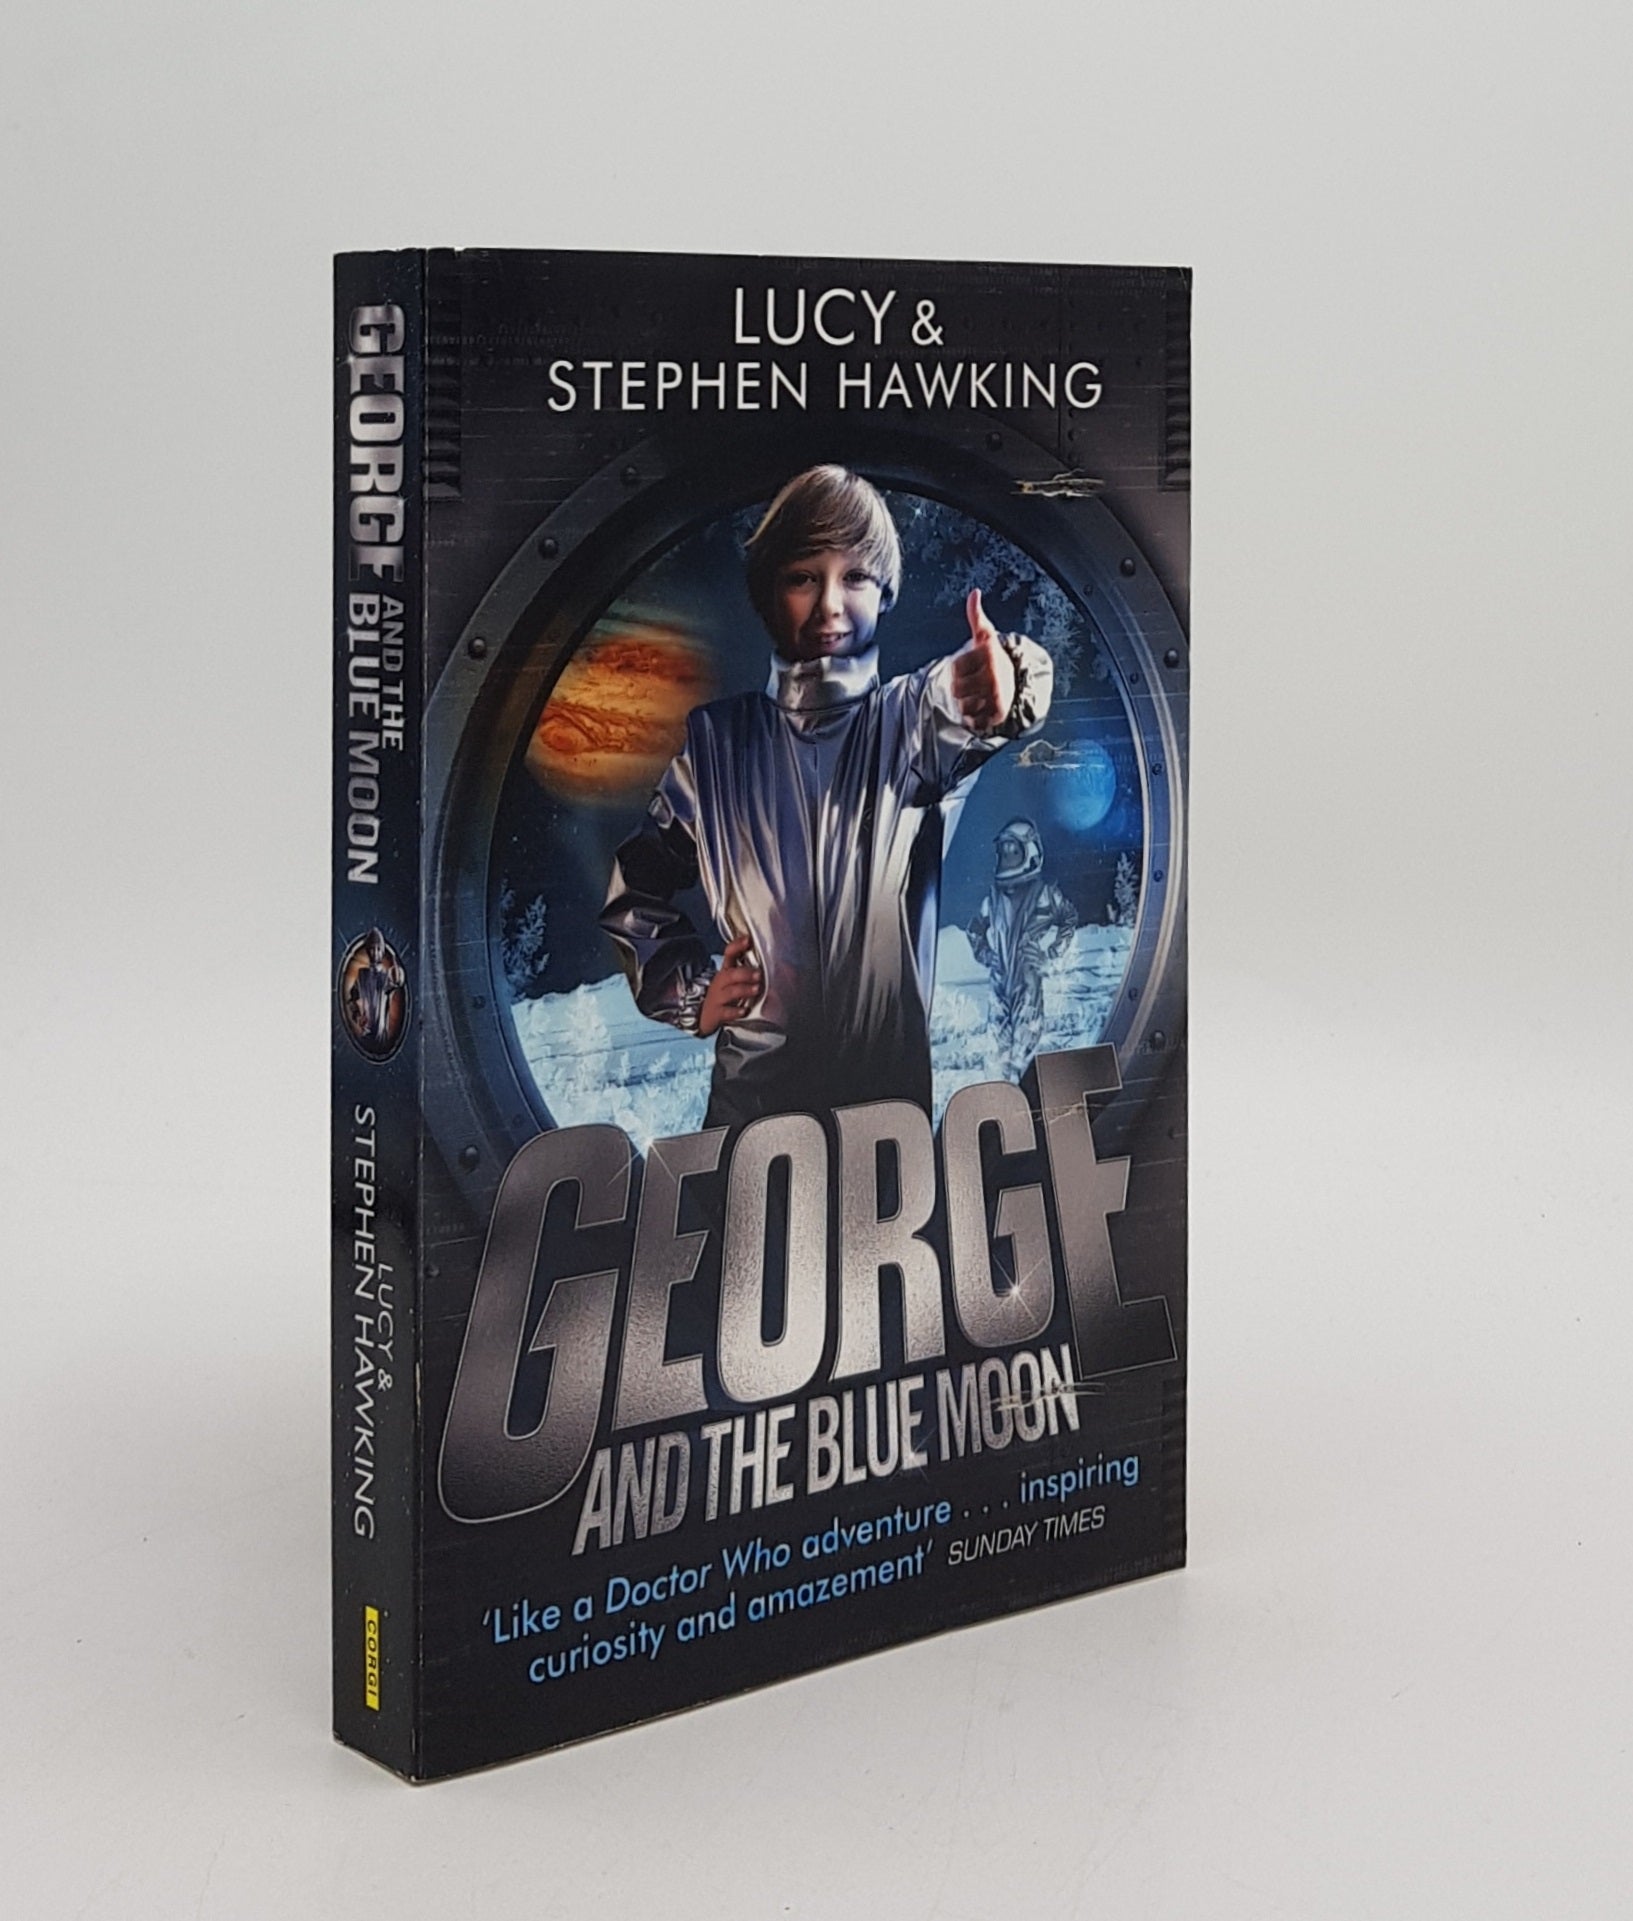 HAWKING Stephen, HAWKING Lucy - George and the Blue Moon